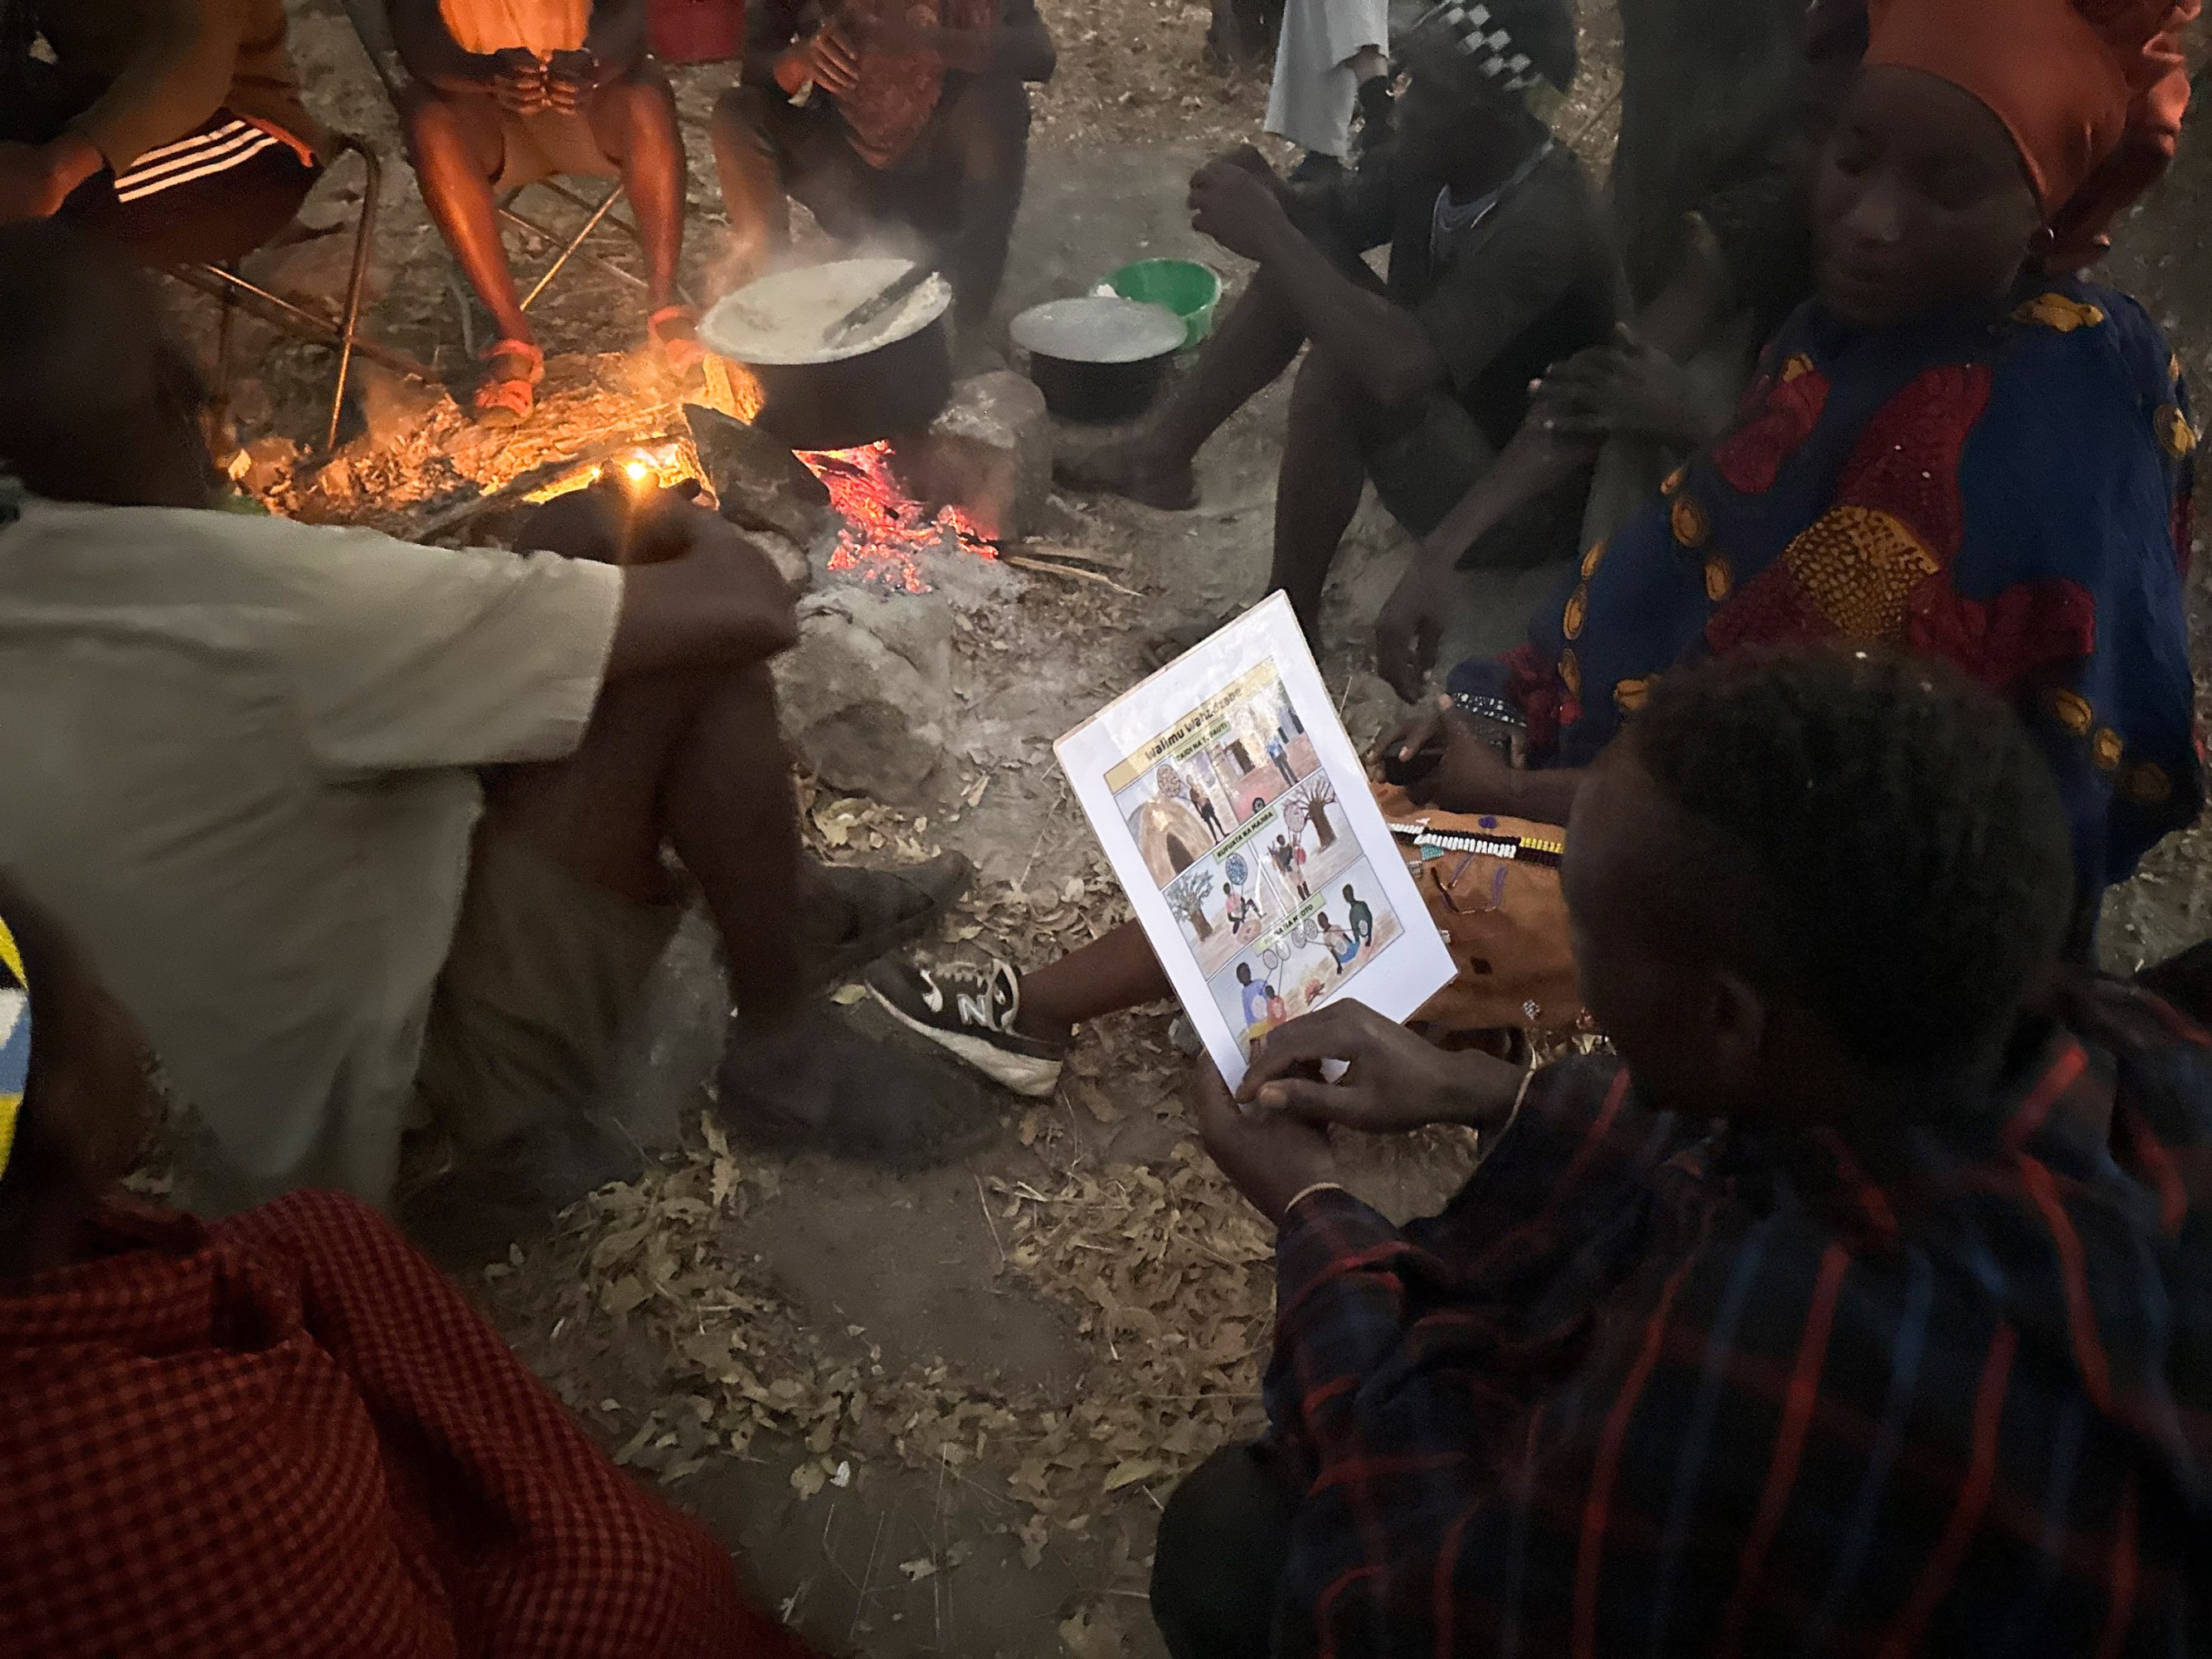 a Hadza looking at the infographic 